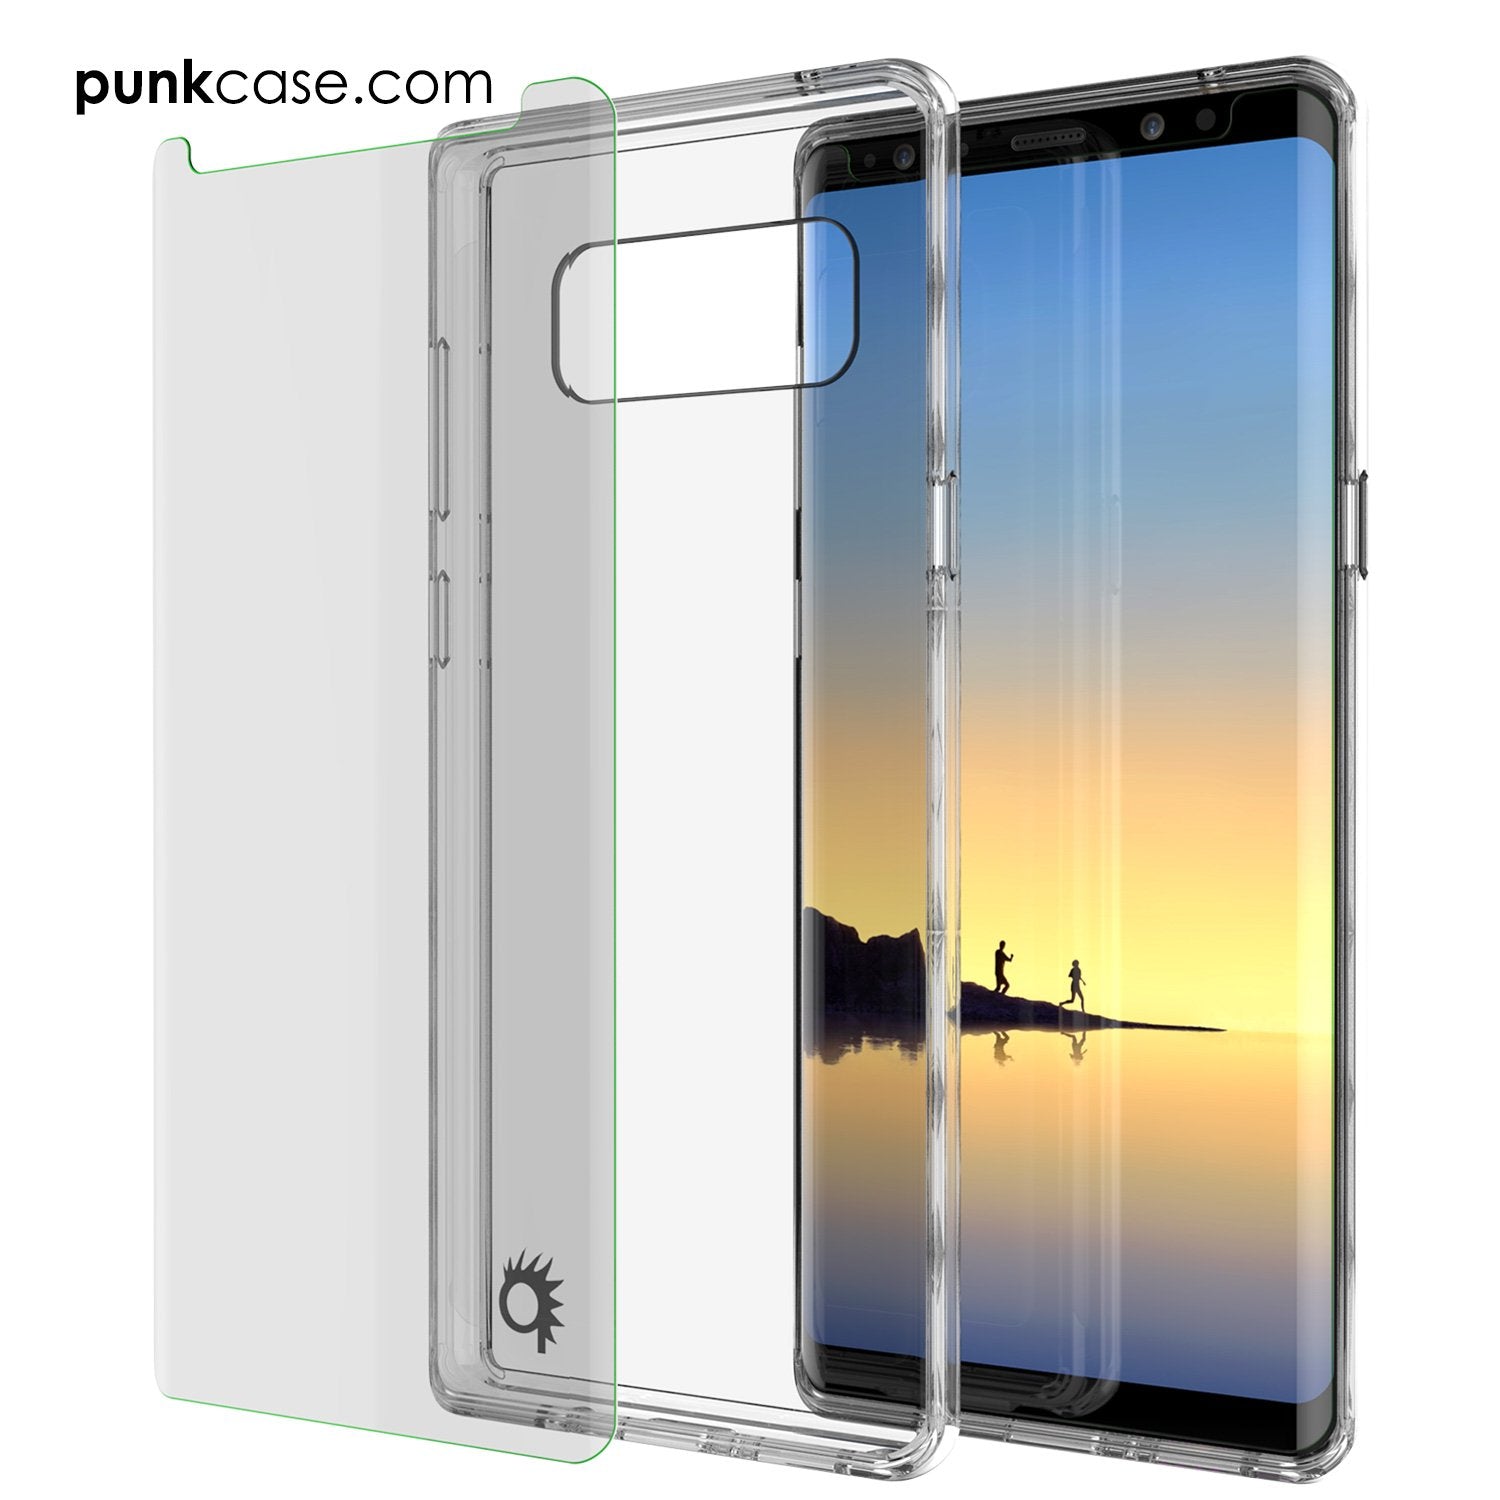 Galaxy Note 8 Case, PUNKcase [LUCID 2.0 Series] [Slim Fit] Armor Cover w/Integrated Anti-Shock System & PUNKSHIELD Screen Protector [Crystal Black] - PunkCase NZ